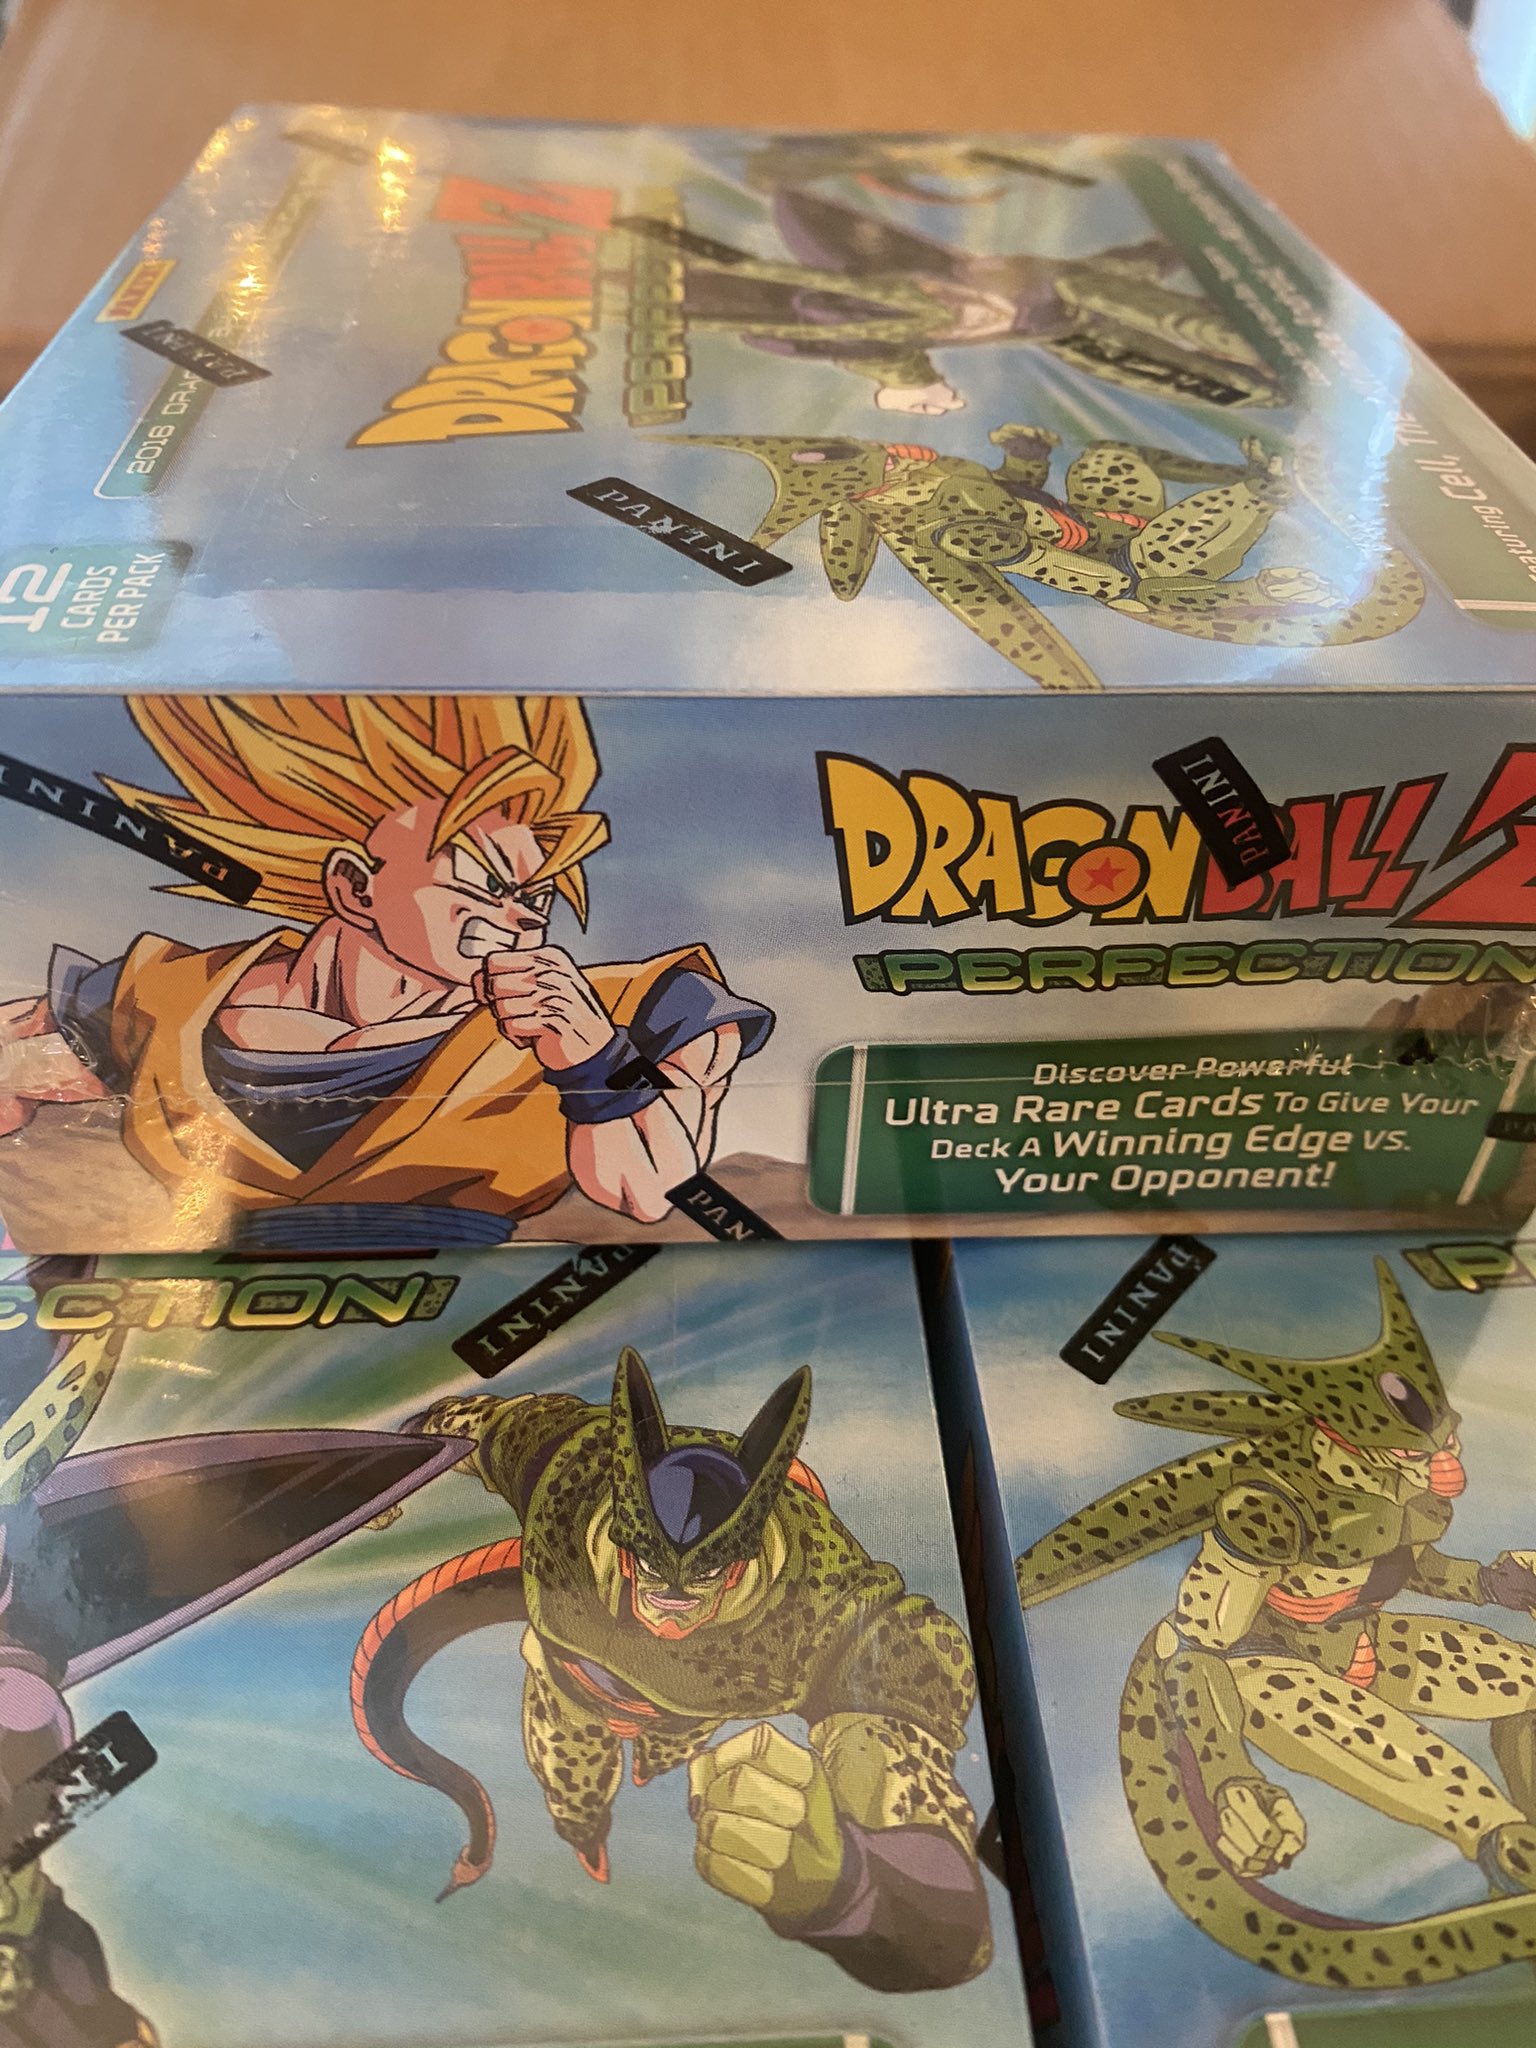 Dragon Ball Z Trading Card Game Perfection Panini 2016 Booster 